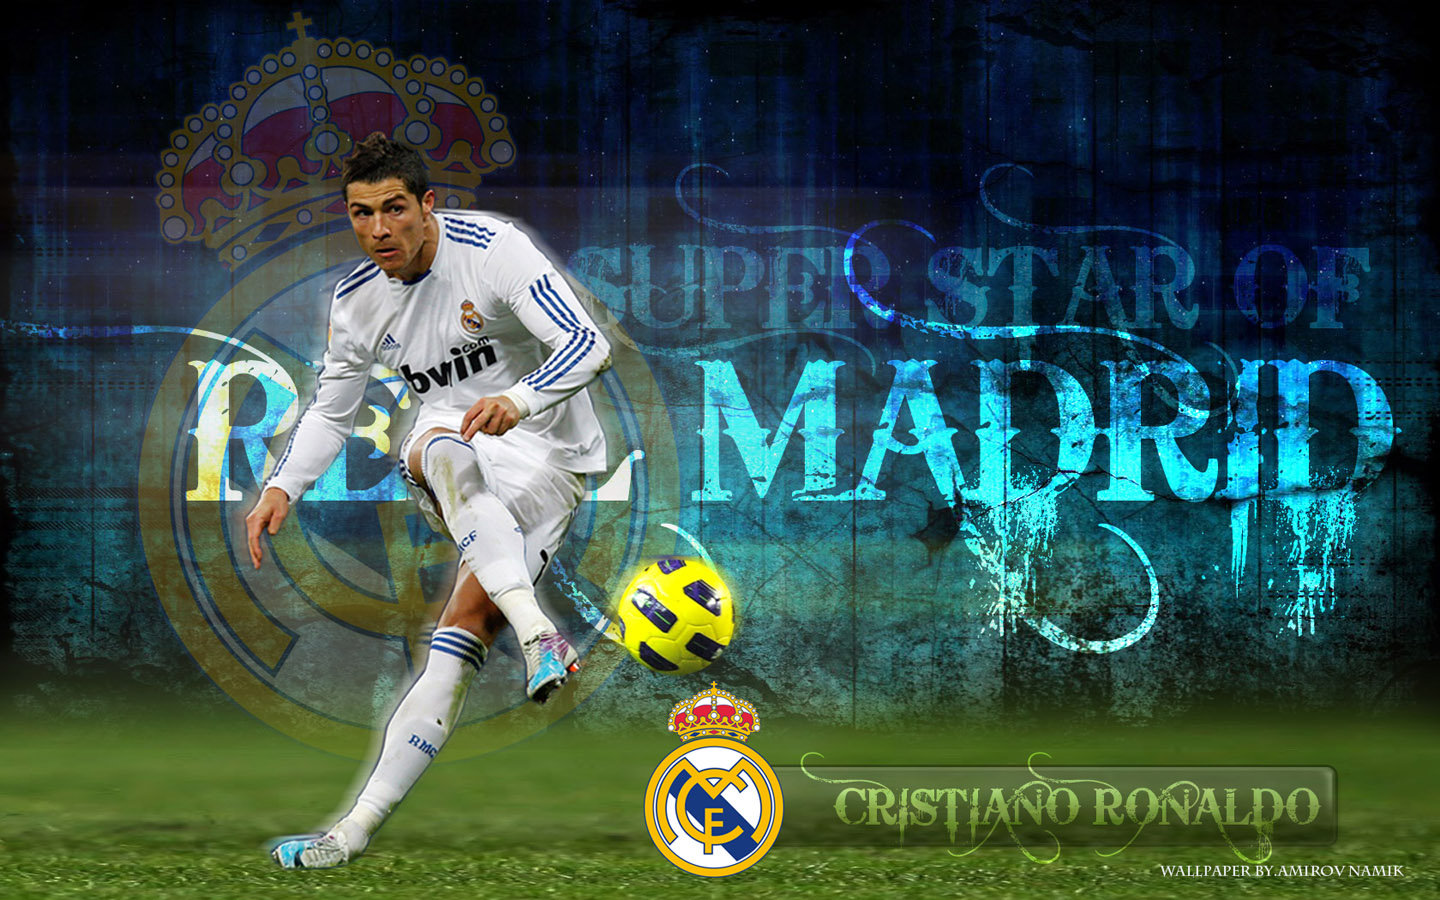 Cristiano ronaldo real madrid wallpaper Wallpapers Backgrounds